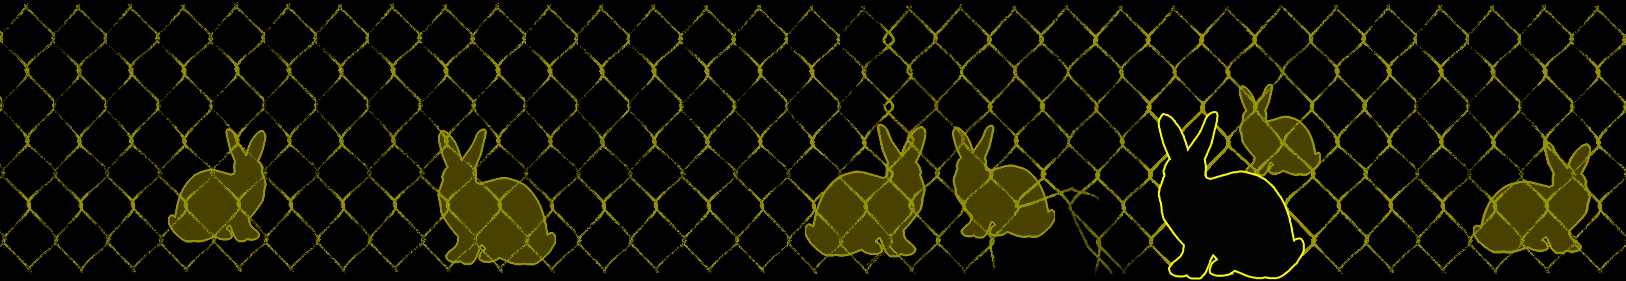 rabbitprooffence_by_14.gif